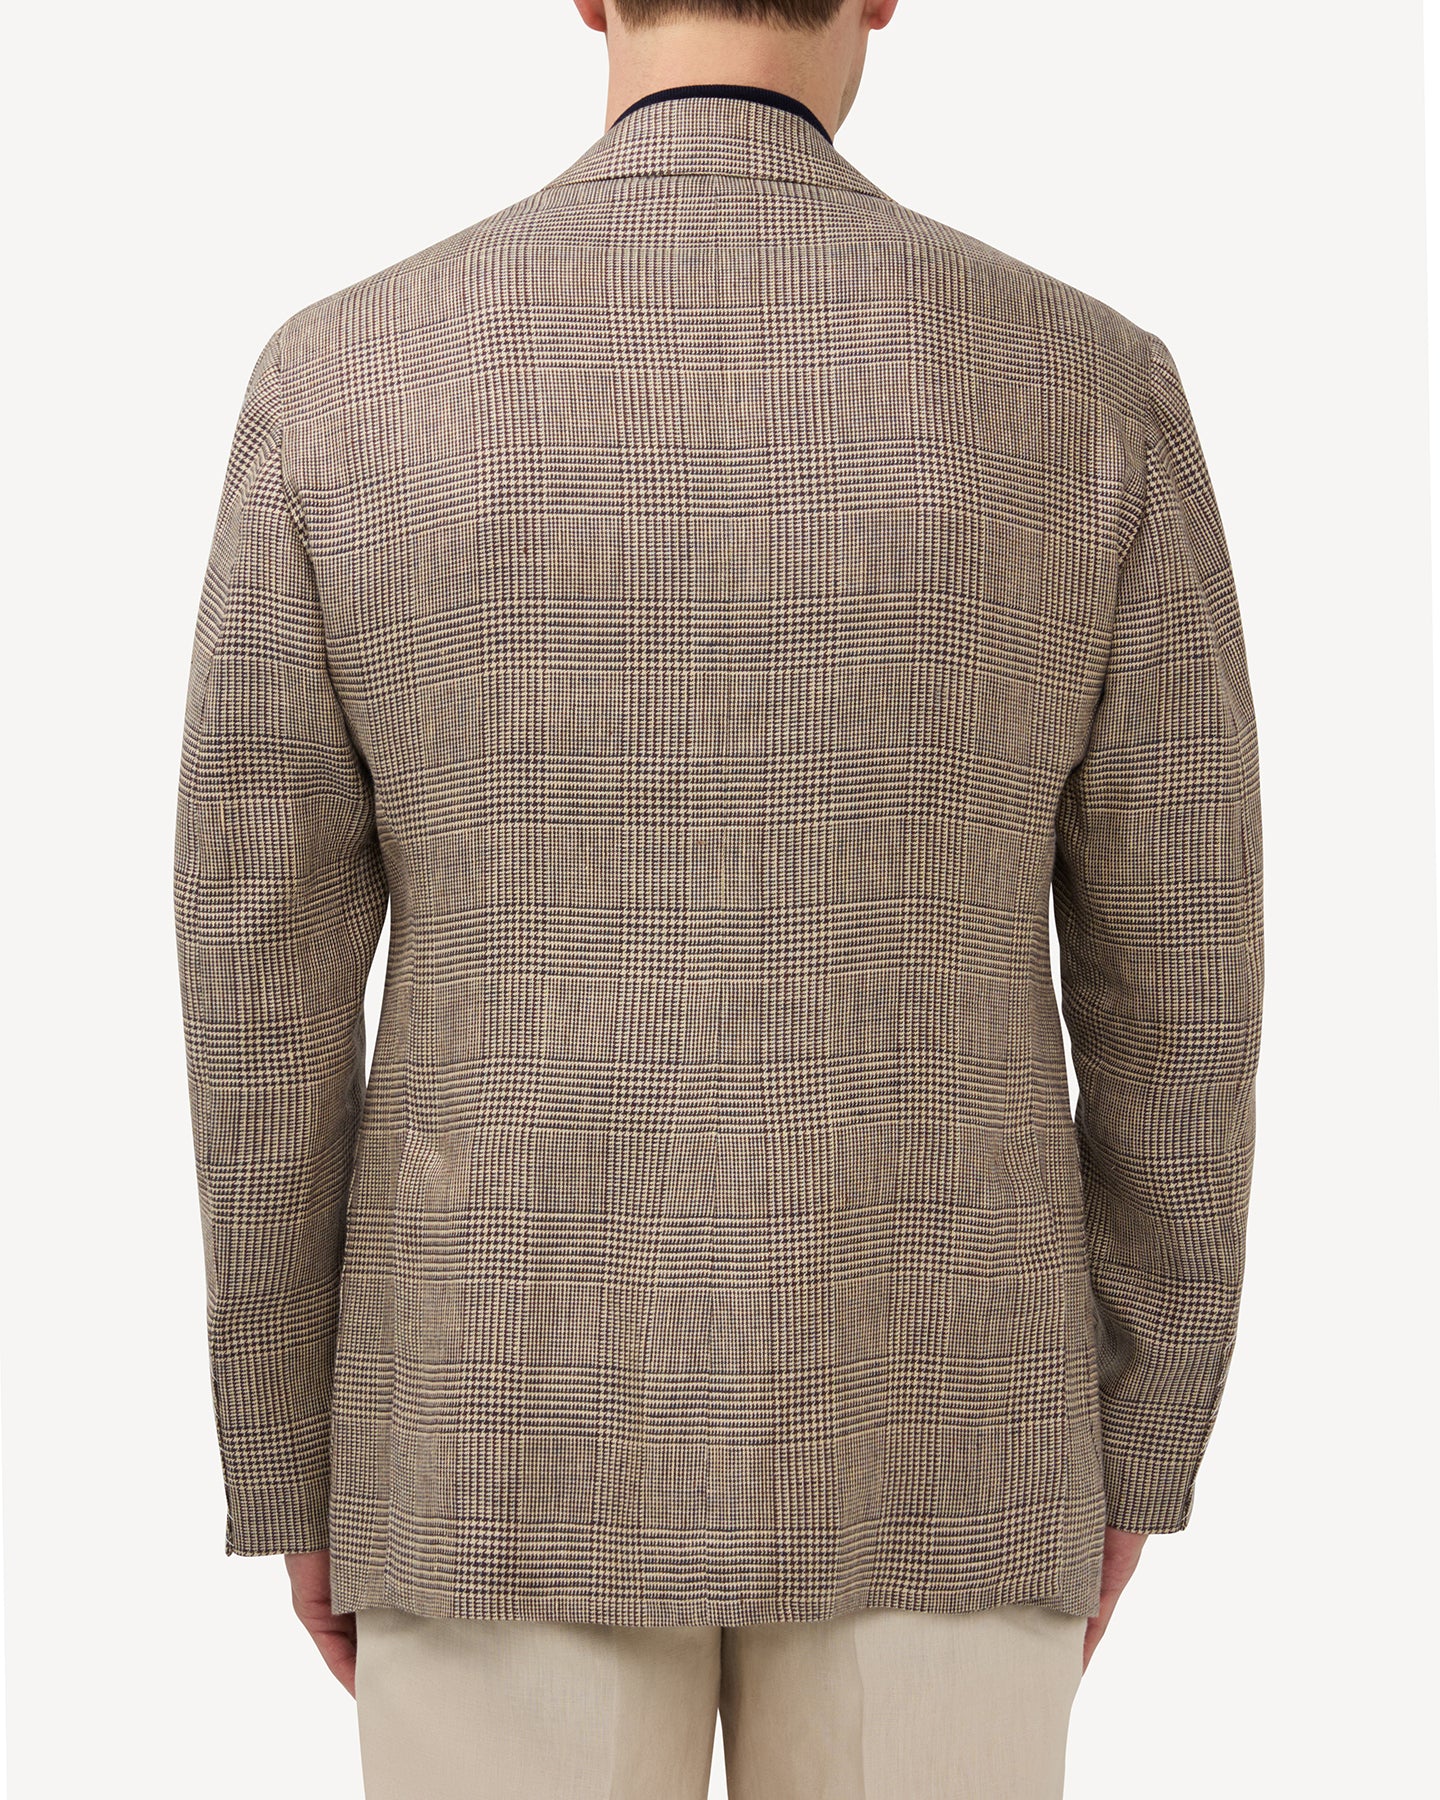 Back view of a brown linen Prince of Wales sport coat